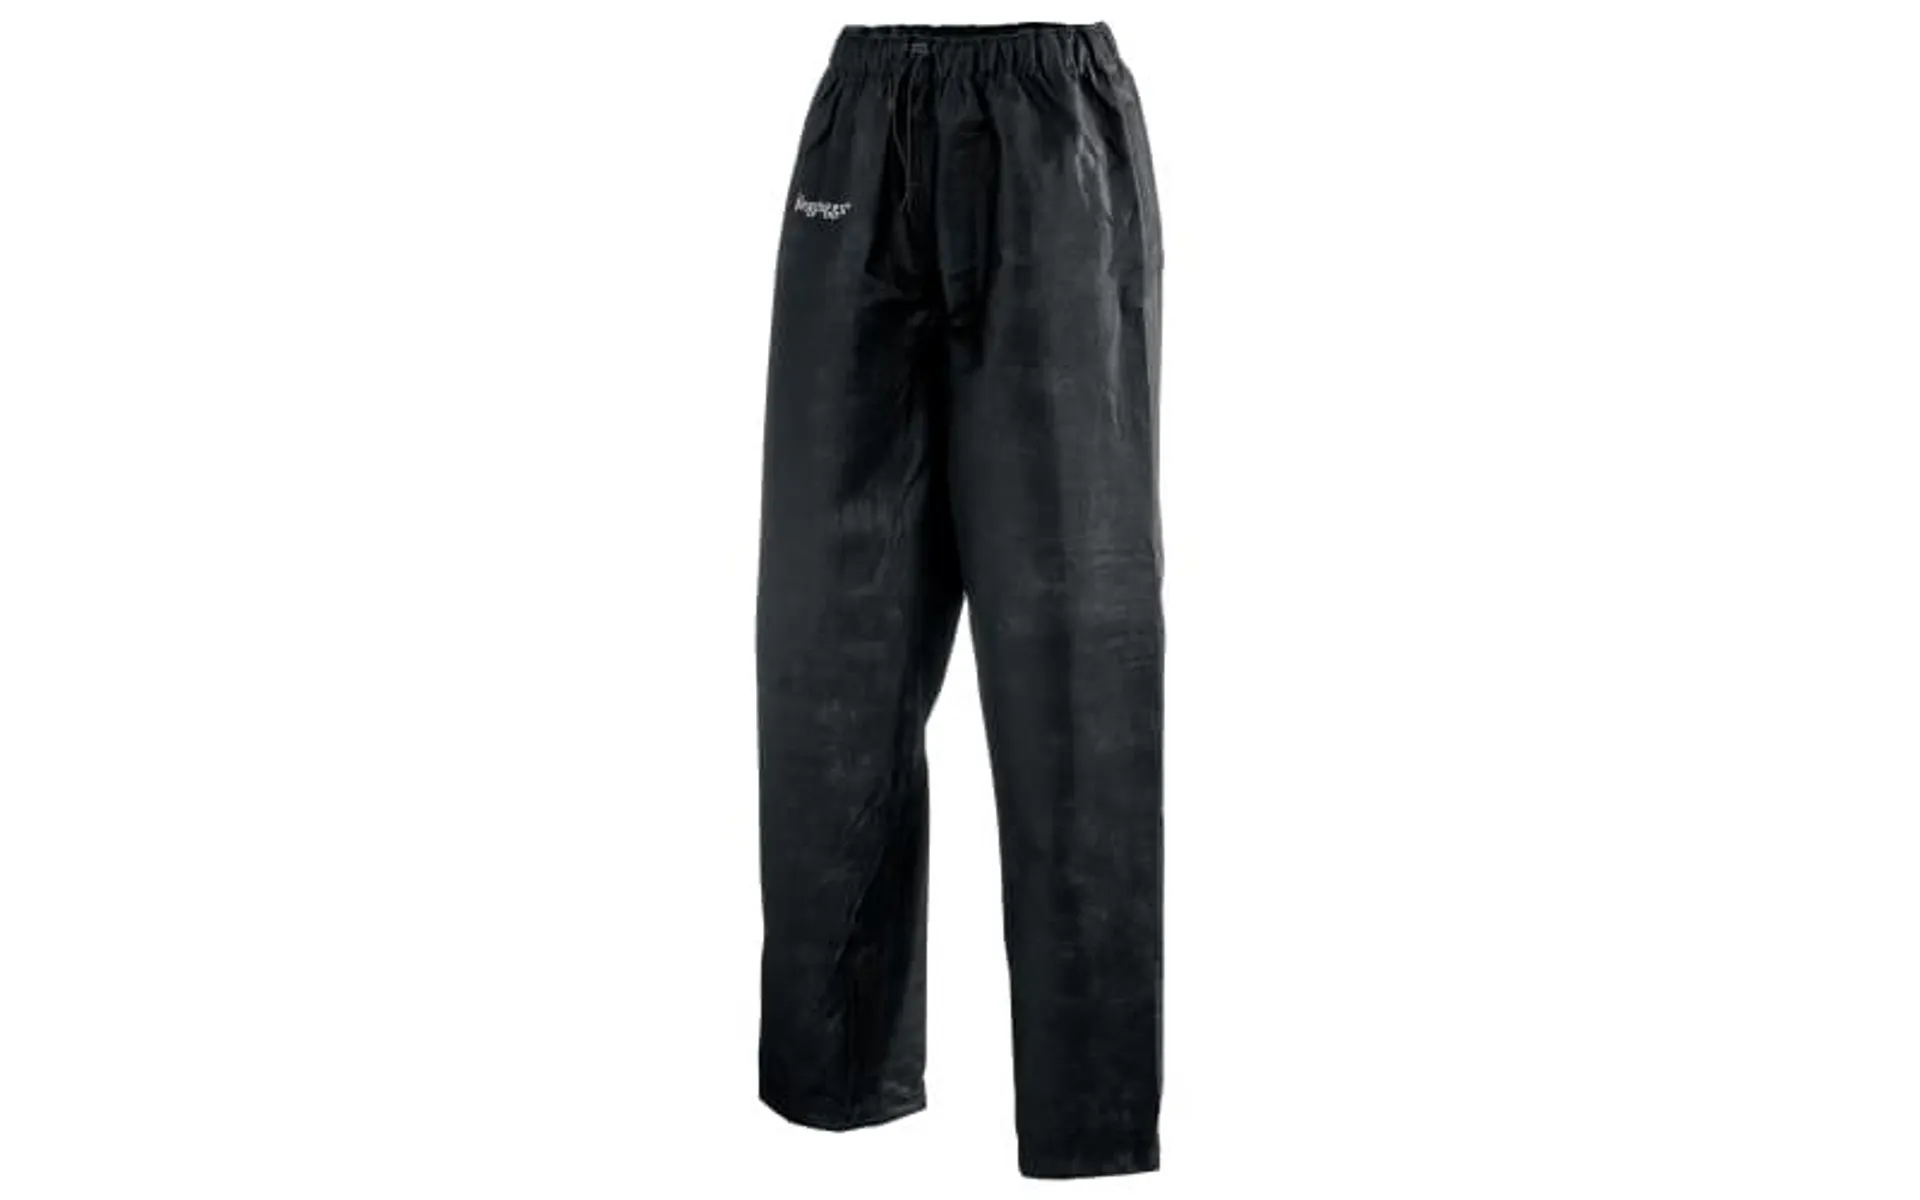 Frogg Toggs Classic50 Pro Action Rain Pants for Ladies